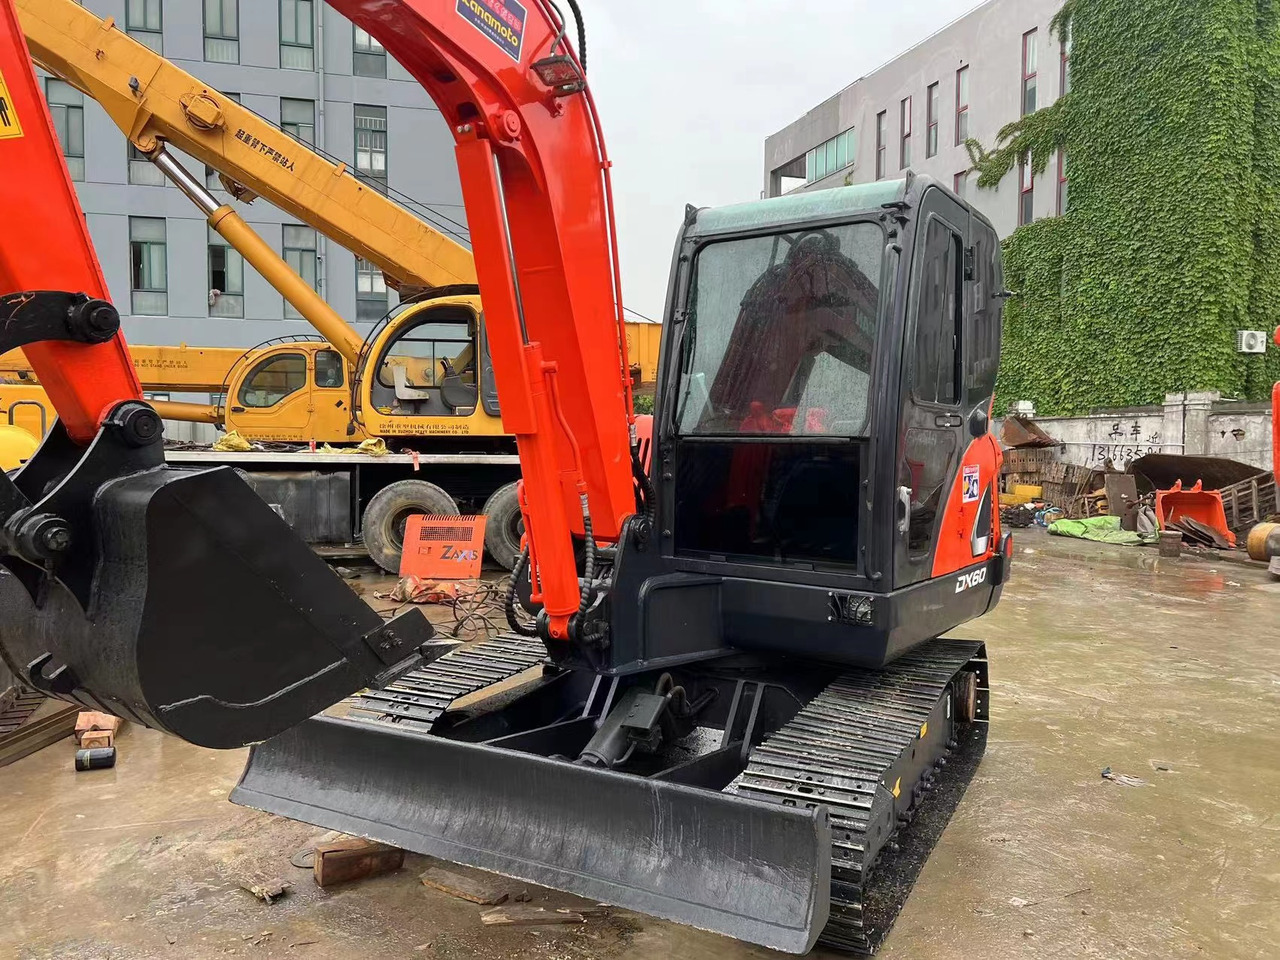 Crawler excavator High quality DOOSAN used excavator DX60 strong power hot selling !!!: picture 9